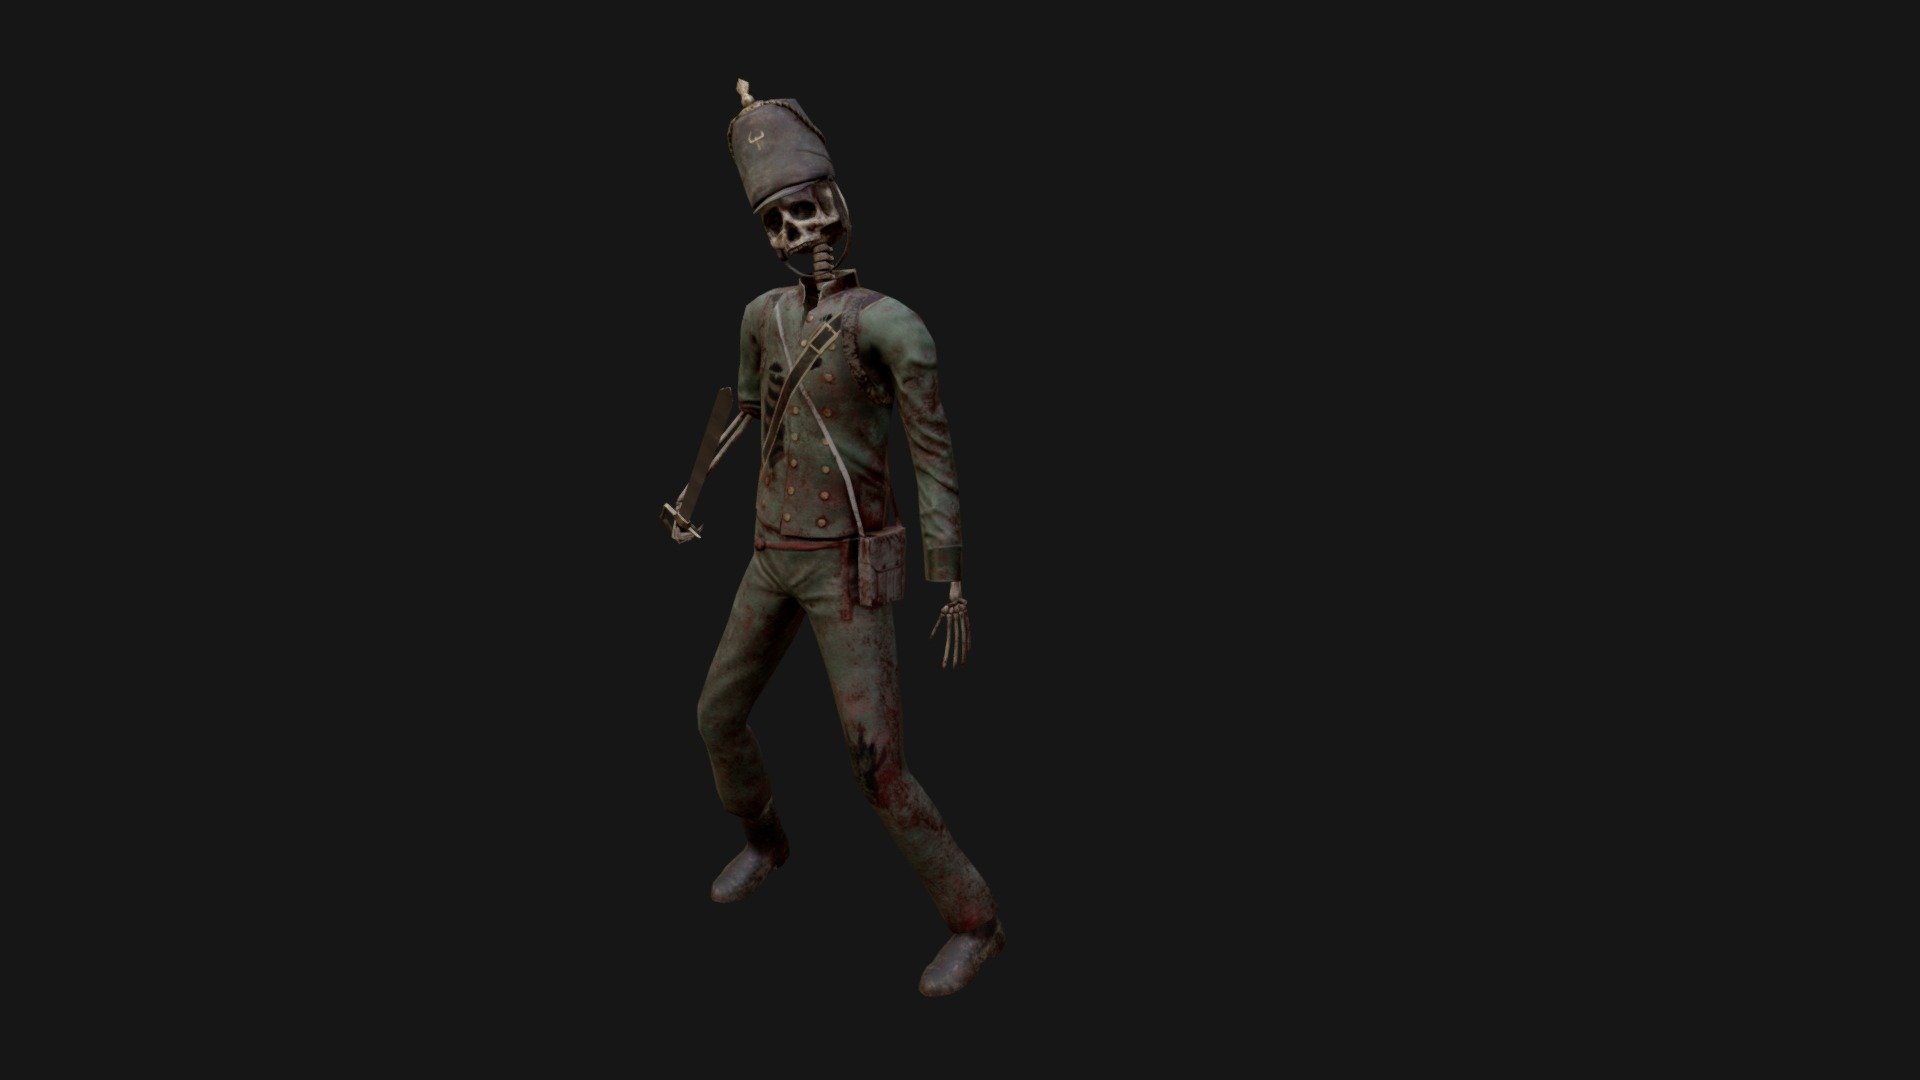 Low poly model for the skeleton soldier, an enemy character for &ldquo;After the Light